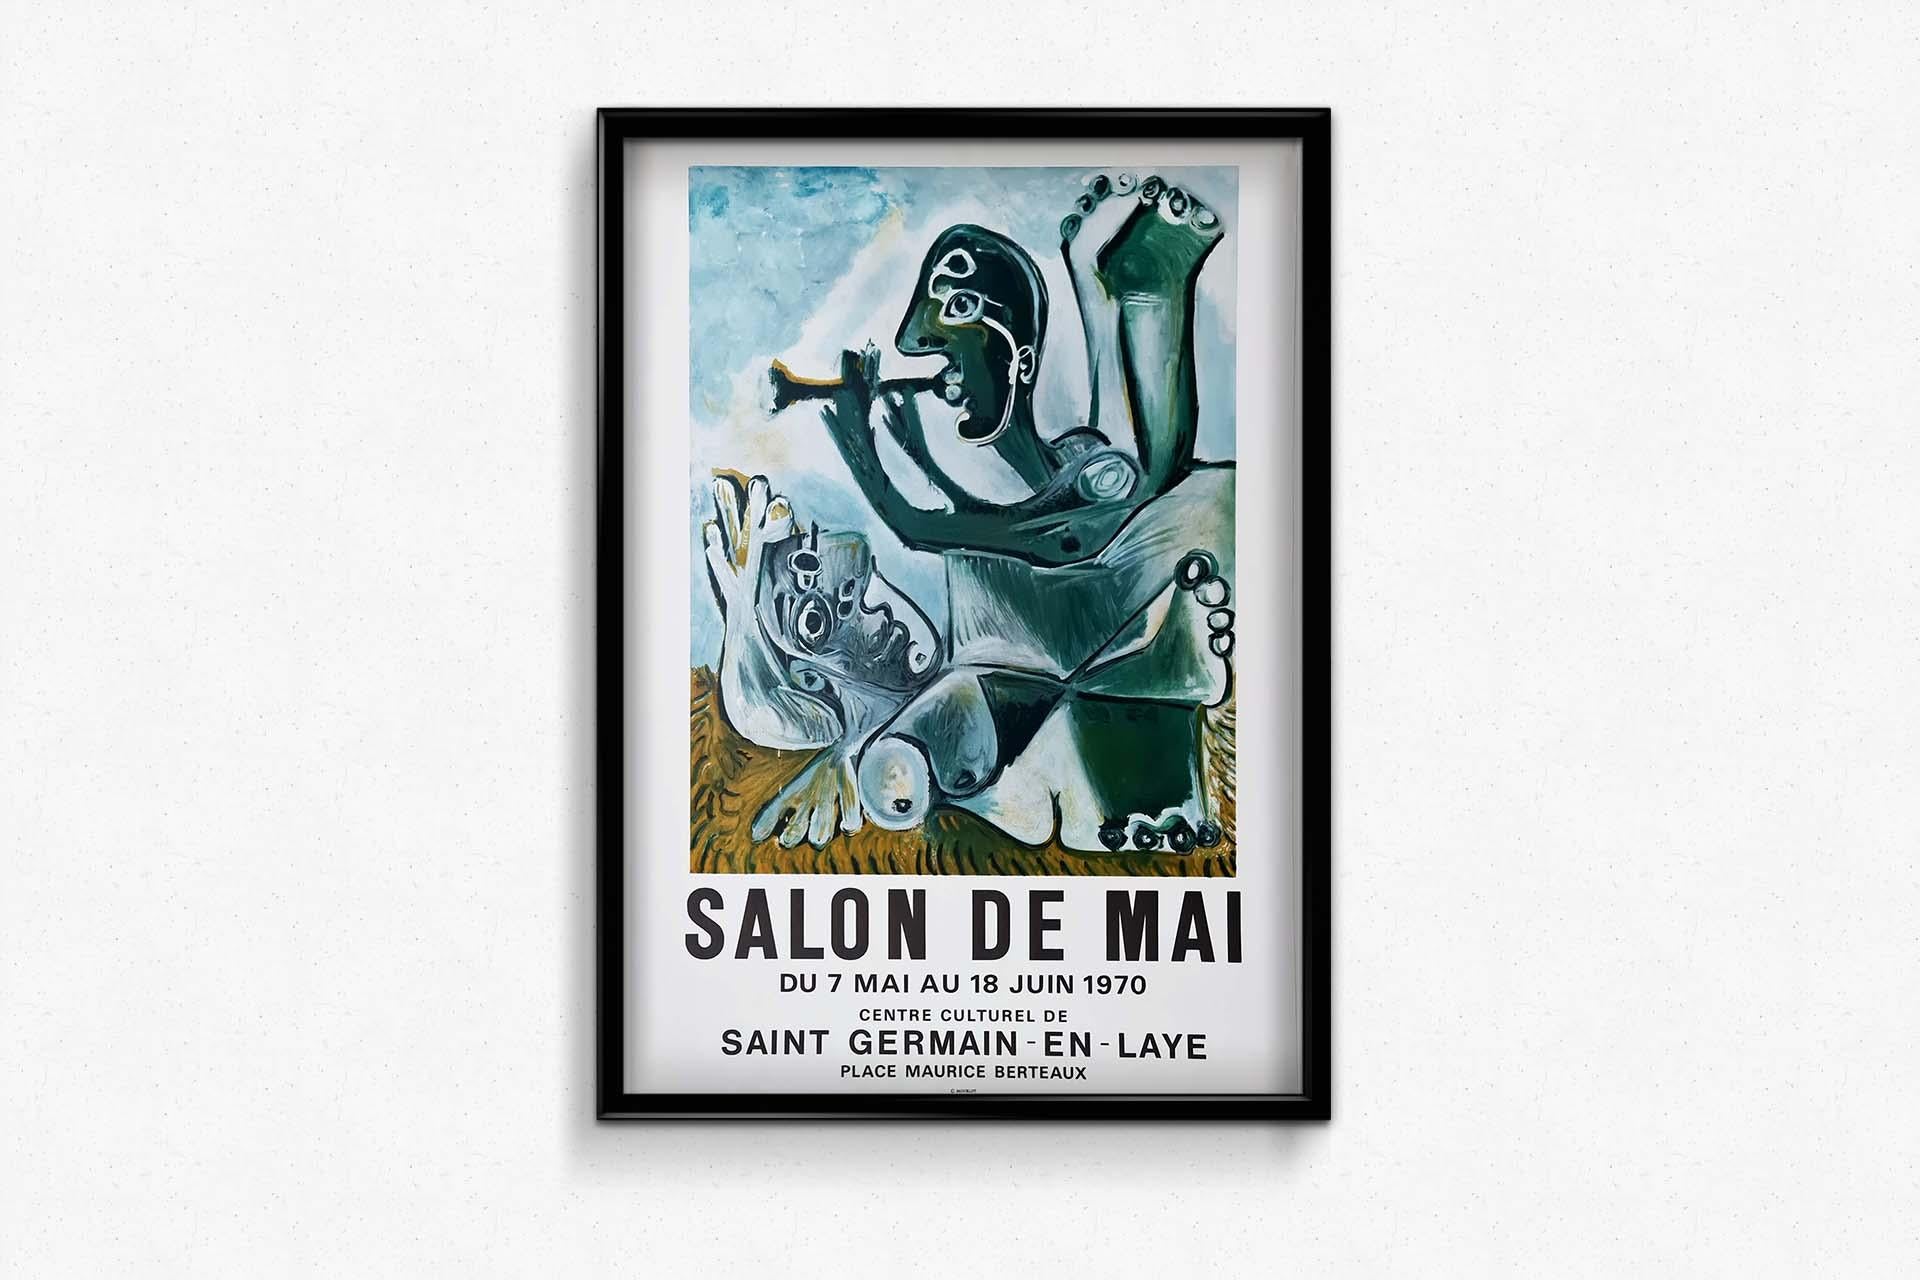 Exhibition poster by Picasso intended to promote the 1970 Salon de Mai For Sale 1